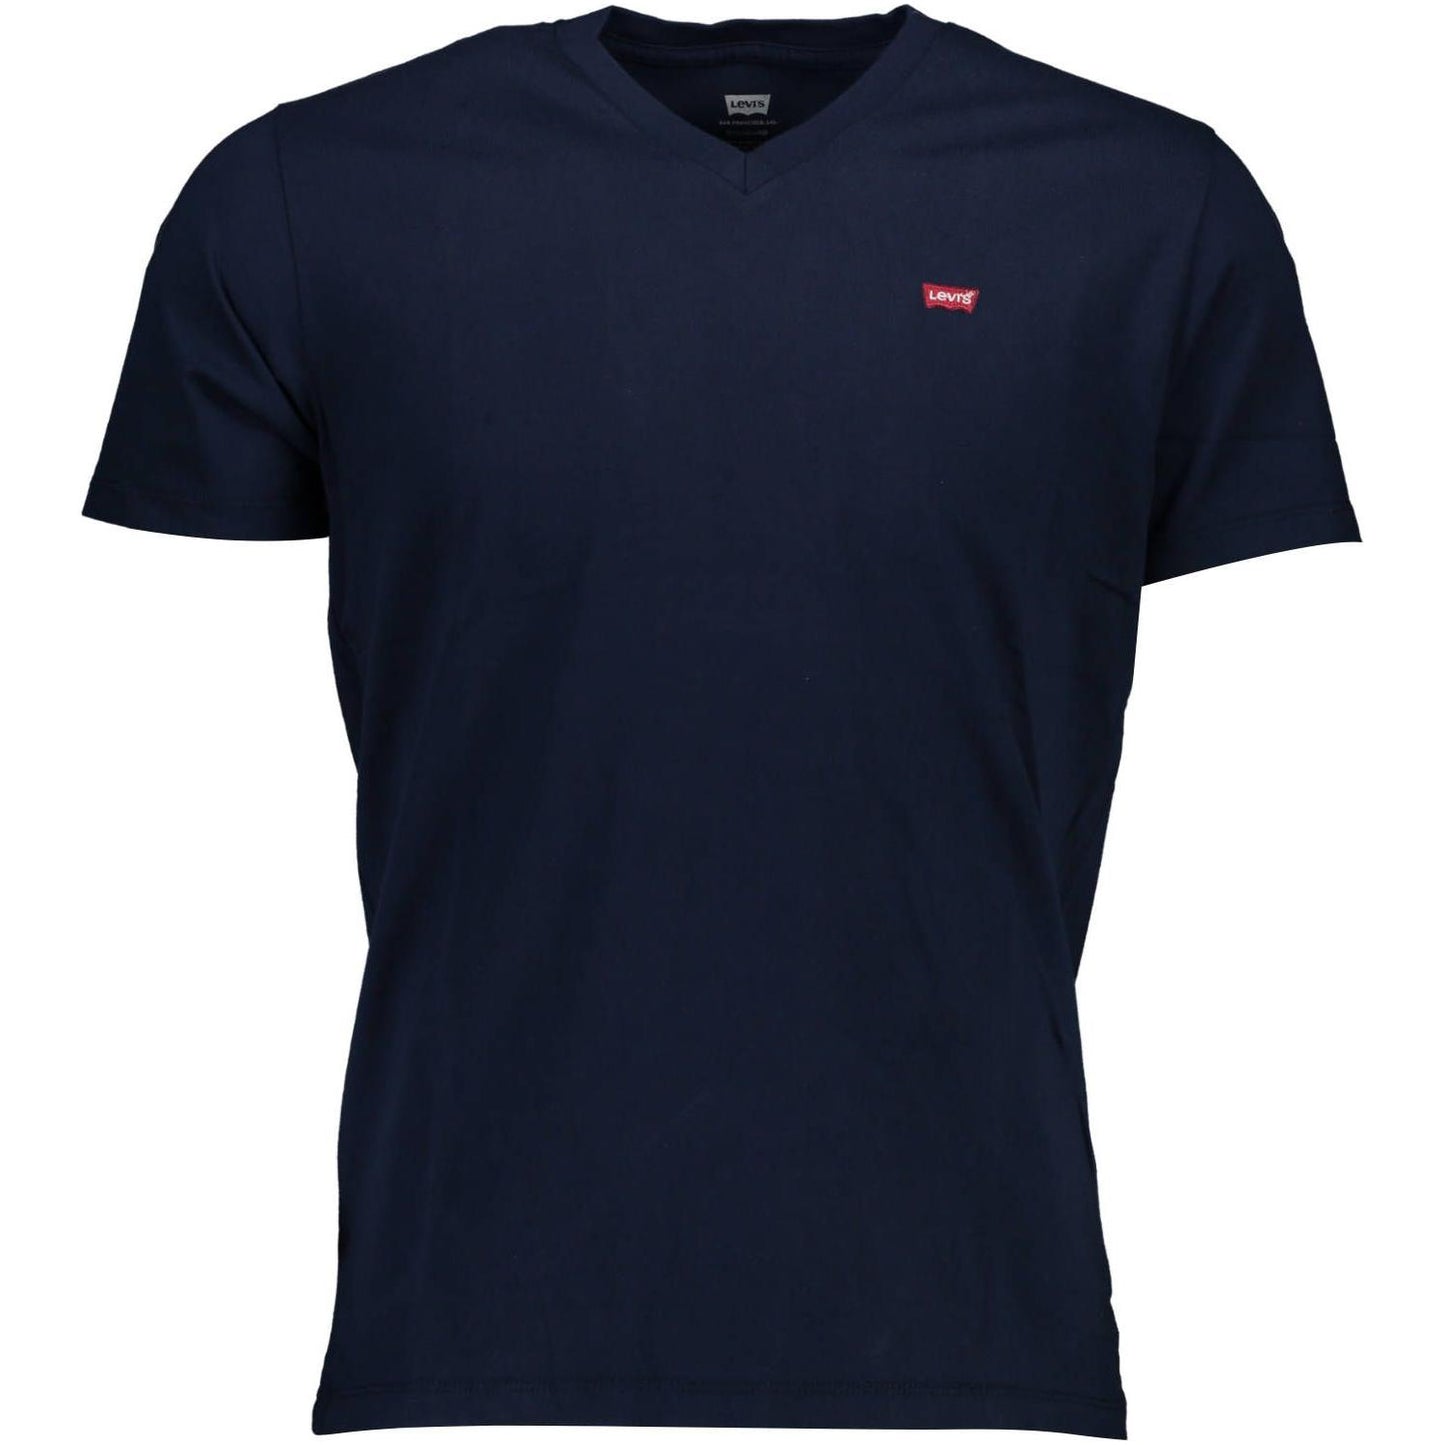 Levi's Classic V-Neck Cotton Tee in Blue classic-v-neck-cotton-tee-in-blue